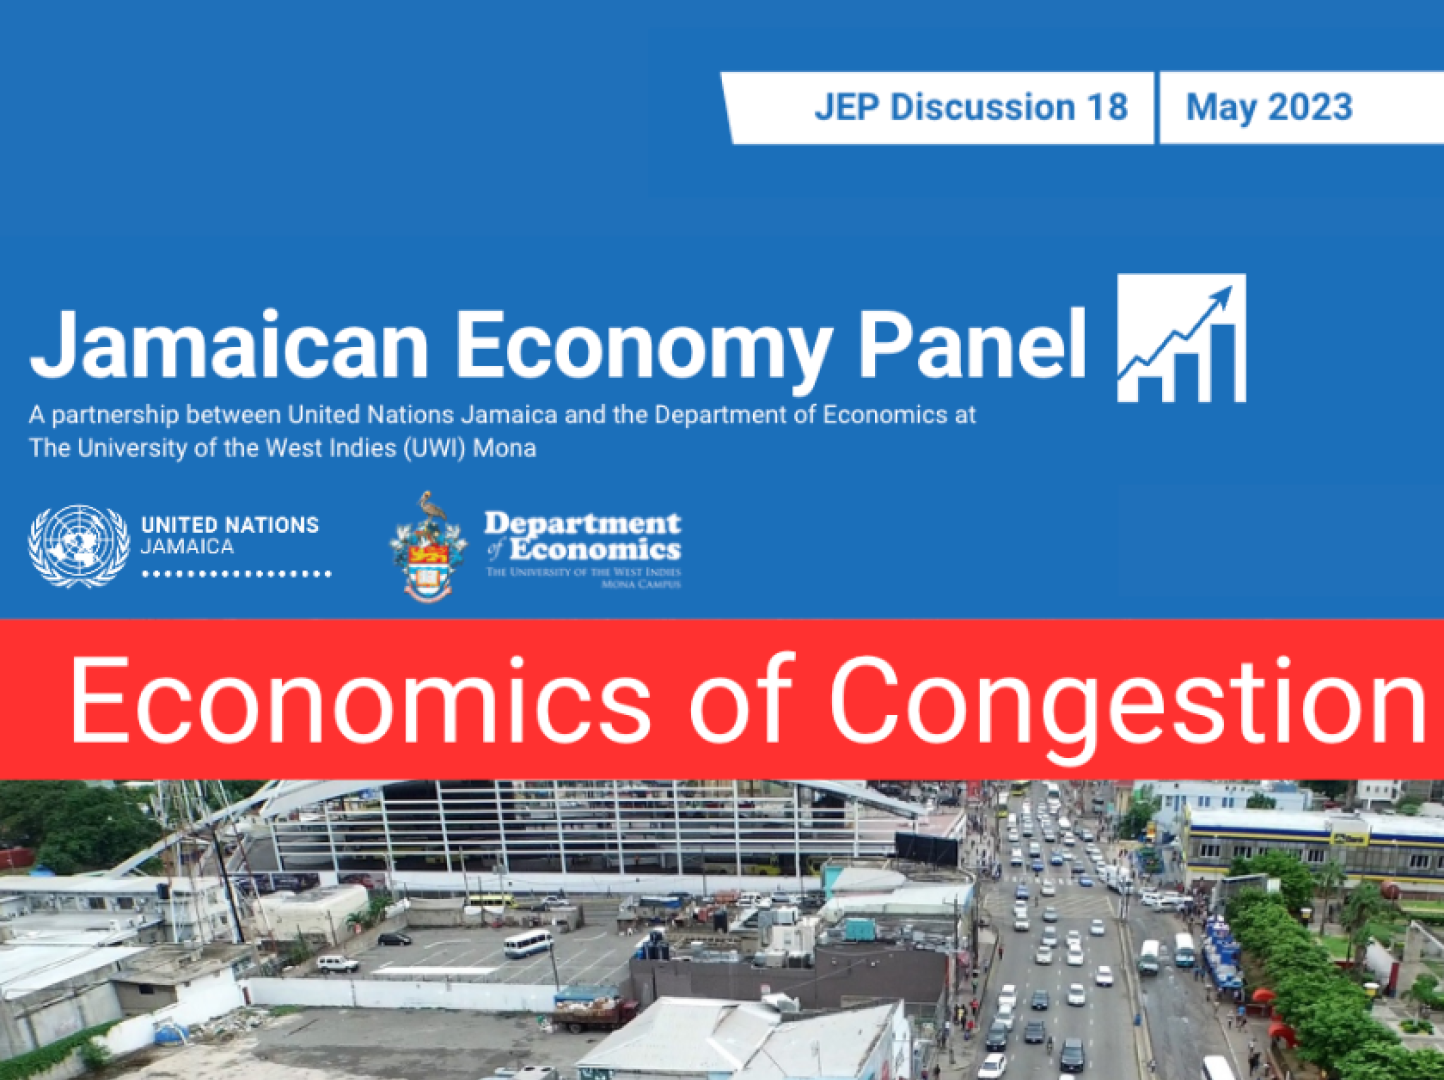 JEP Discussion 18 Flyer May 2023